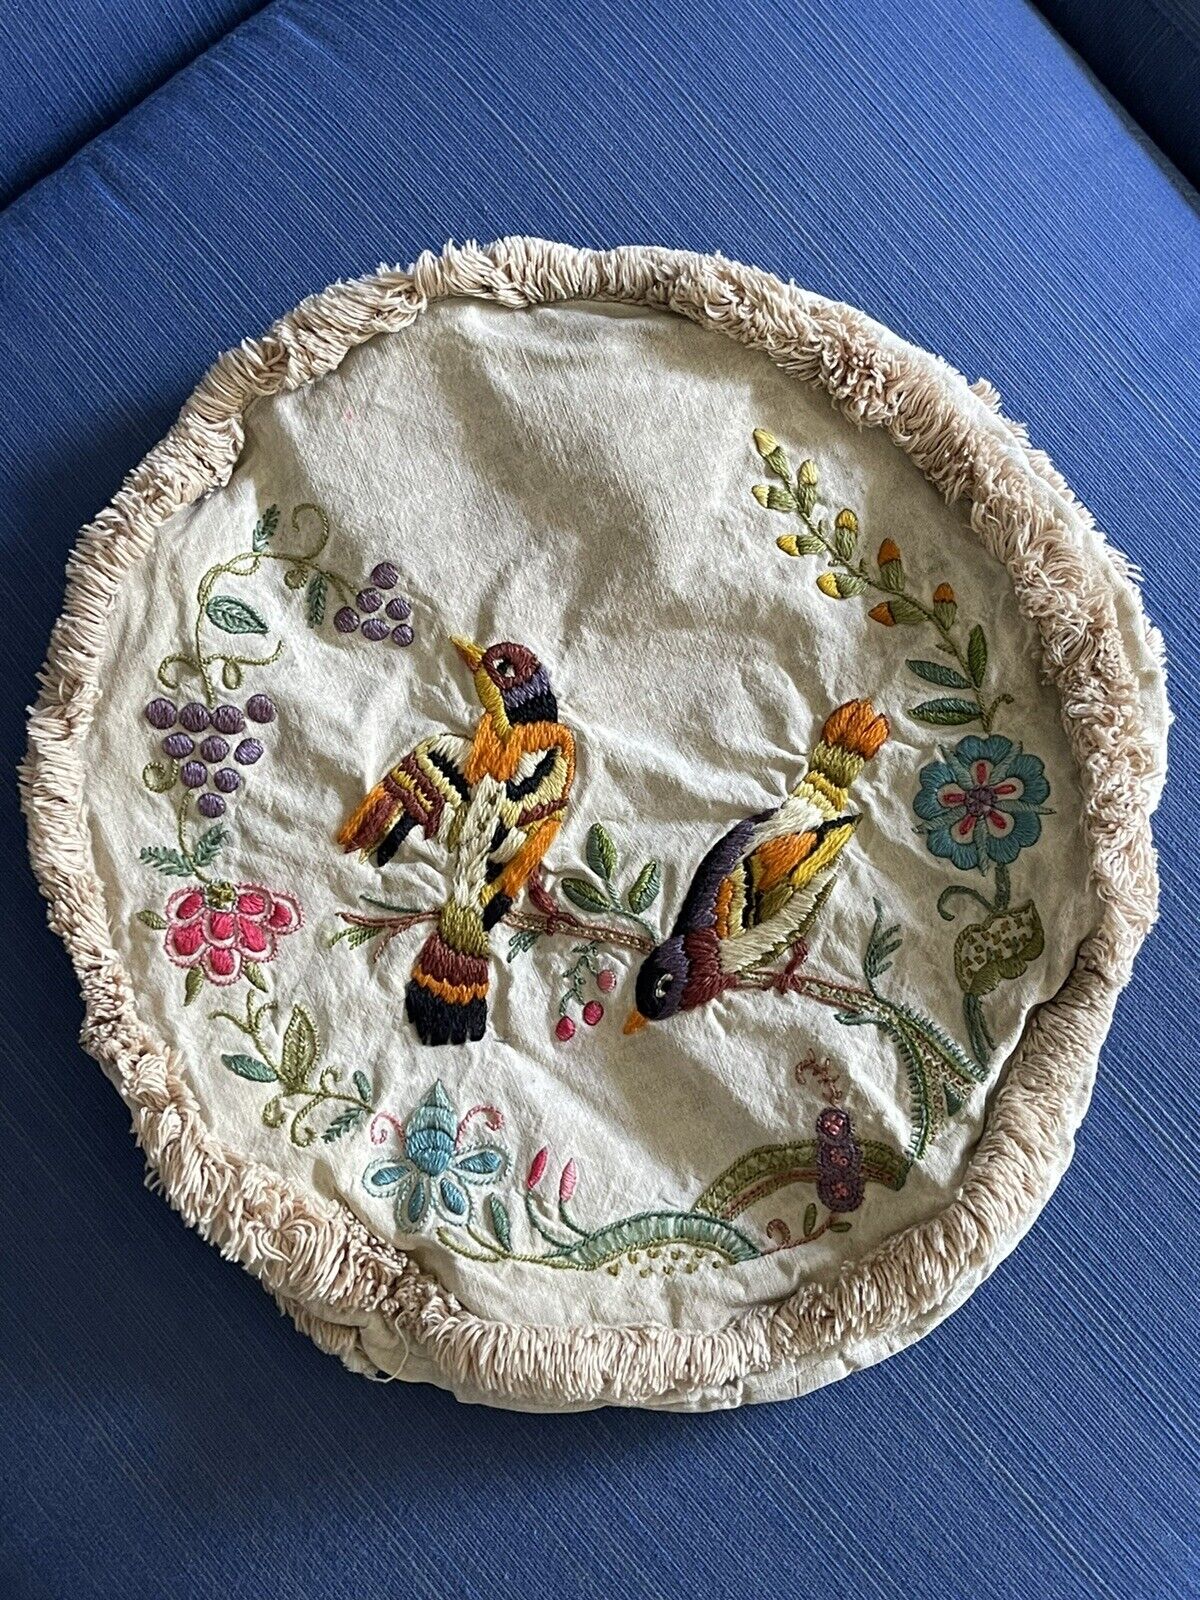 Vintage Crewel Embroidered Floral Throw Pillow With Fringe Rothschild Bird BOHO